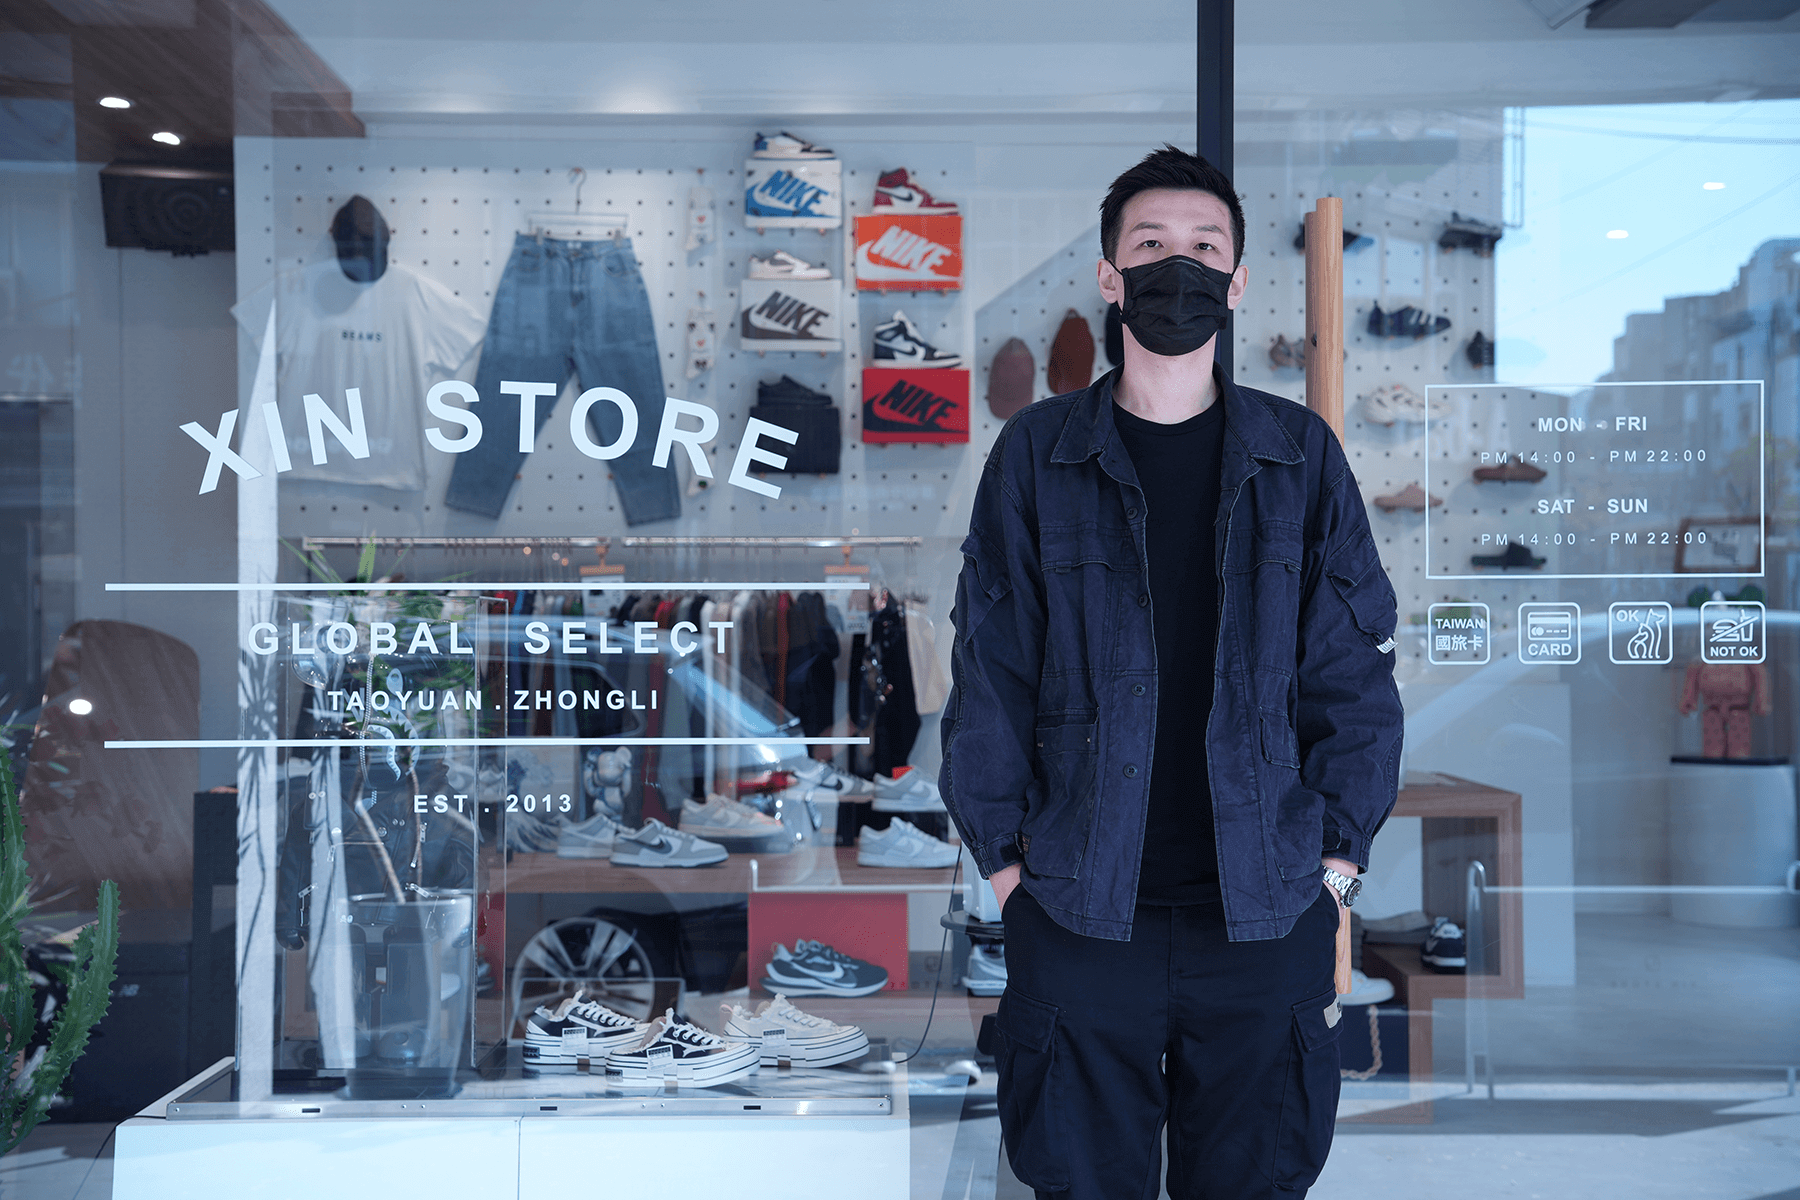 《 Xin Store 》老闆象哥